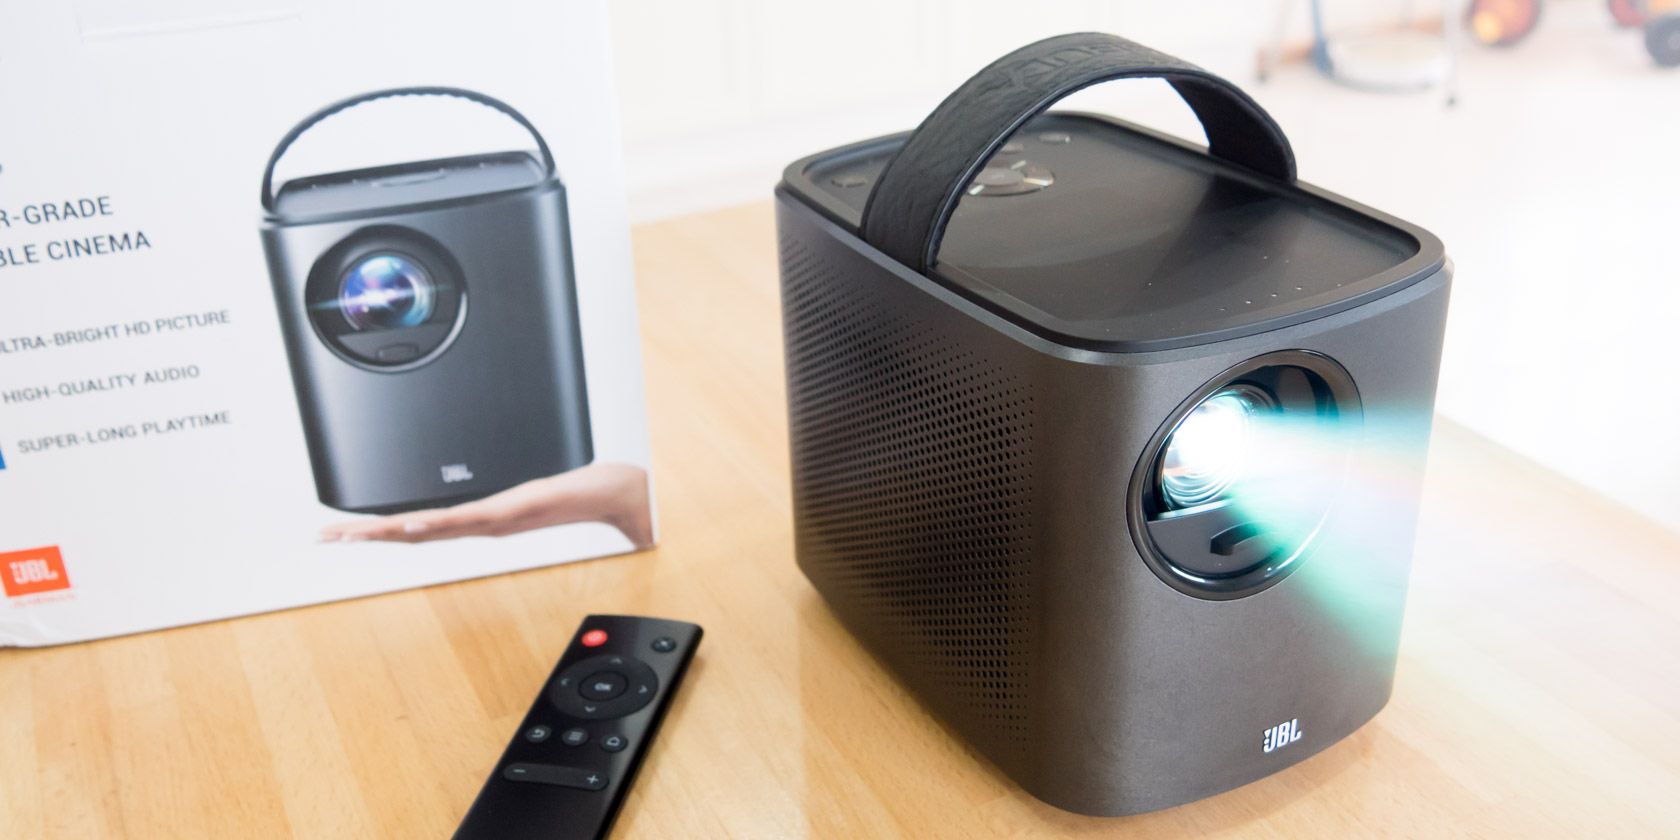 Nebula Mars This IS Portable Projector Looking For!